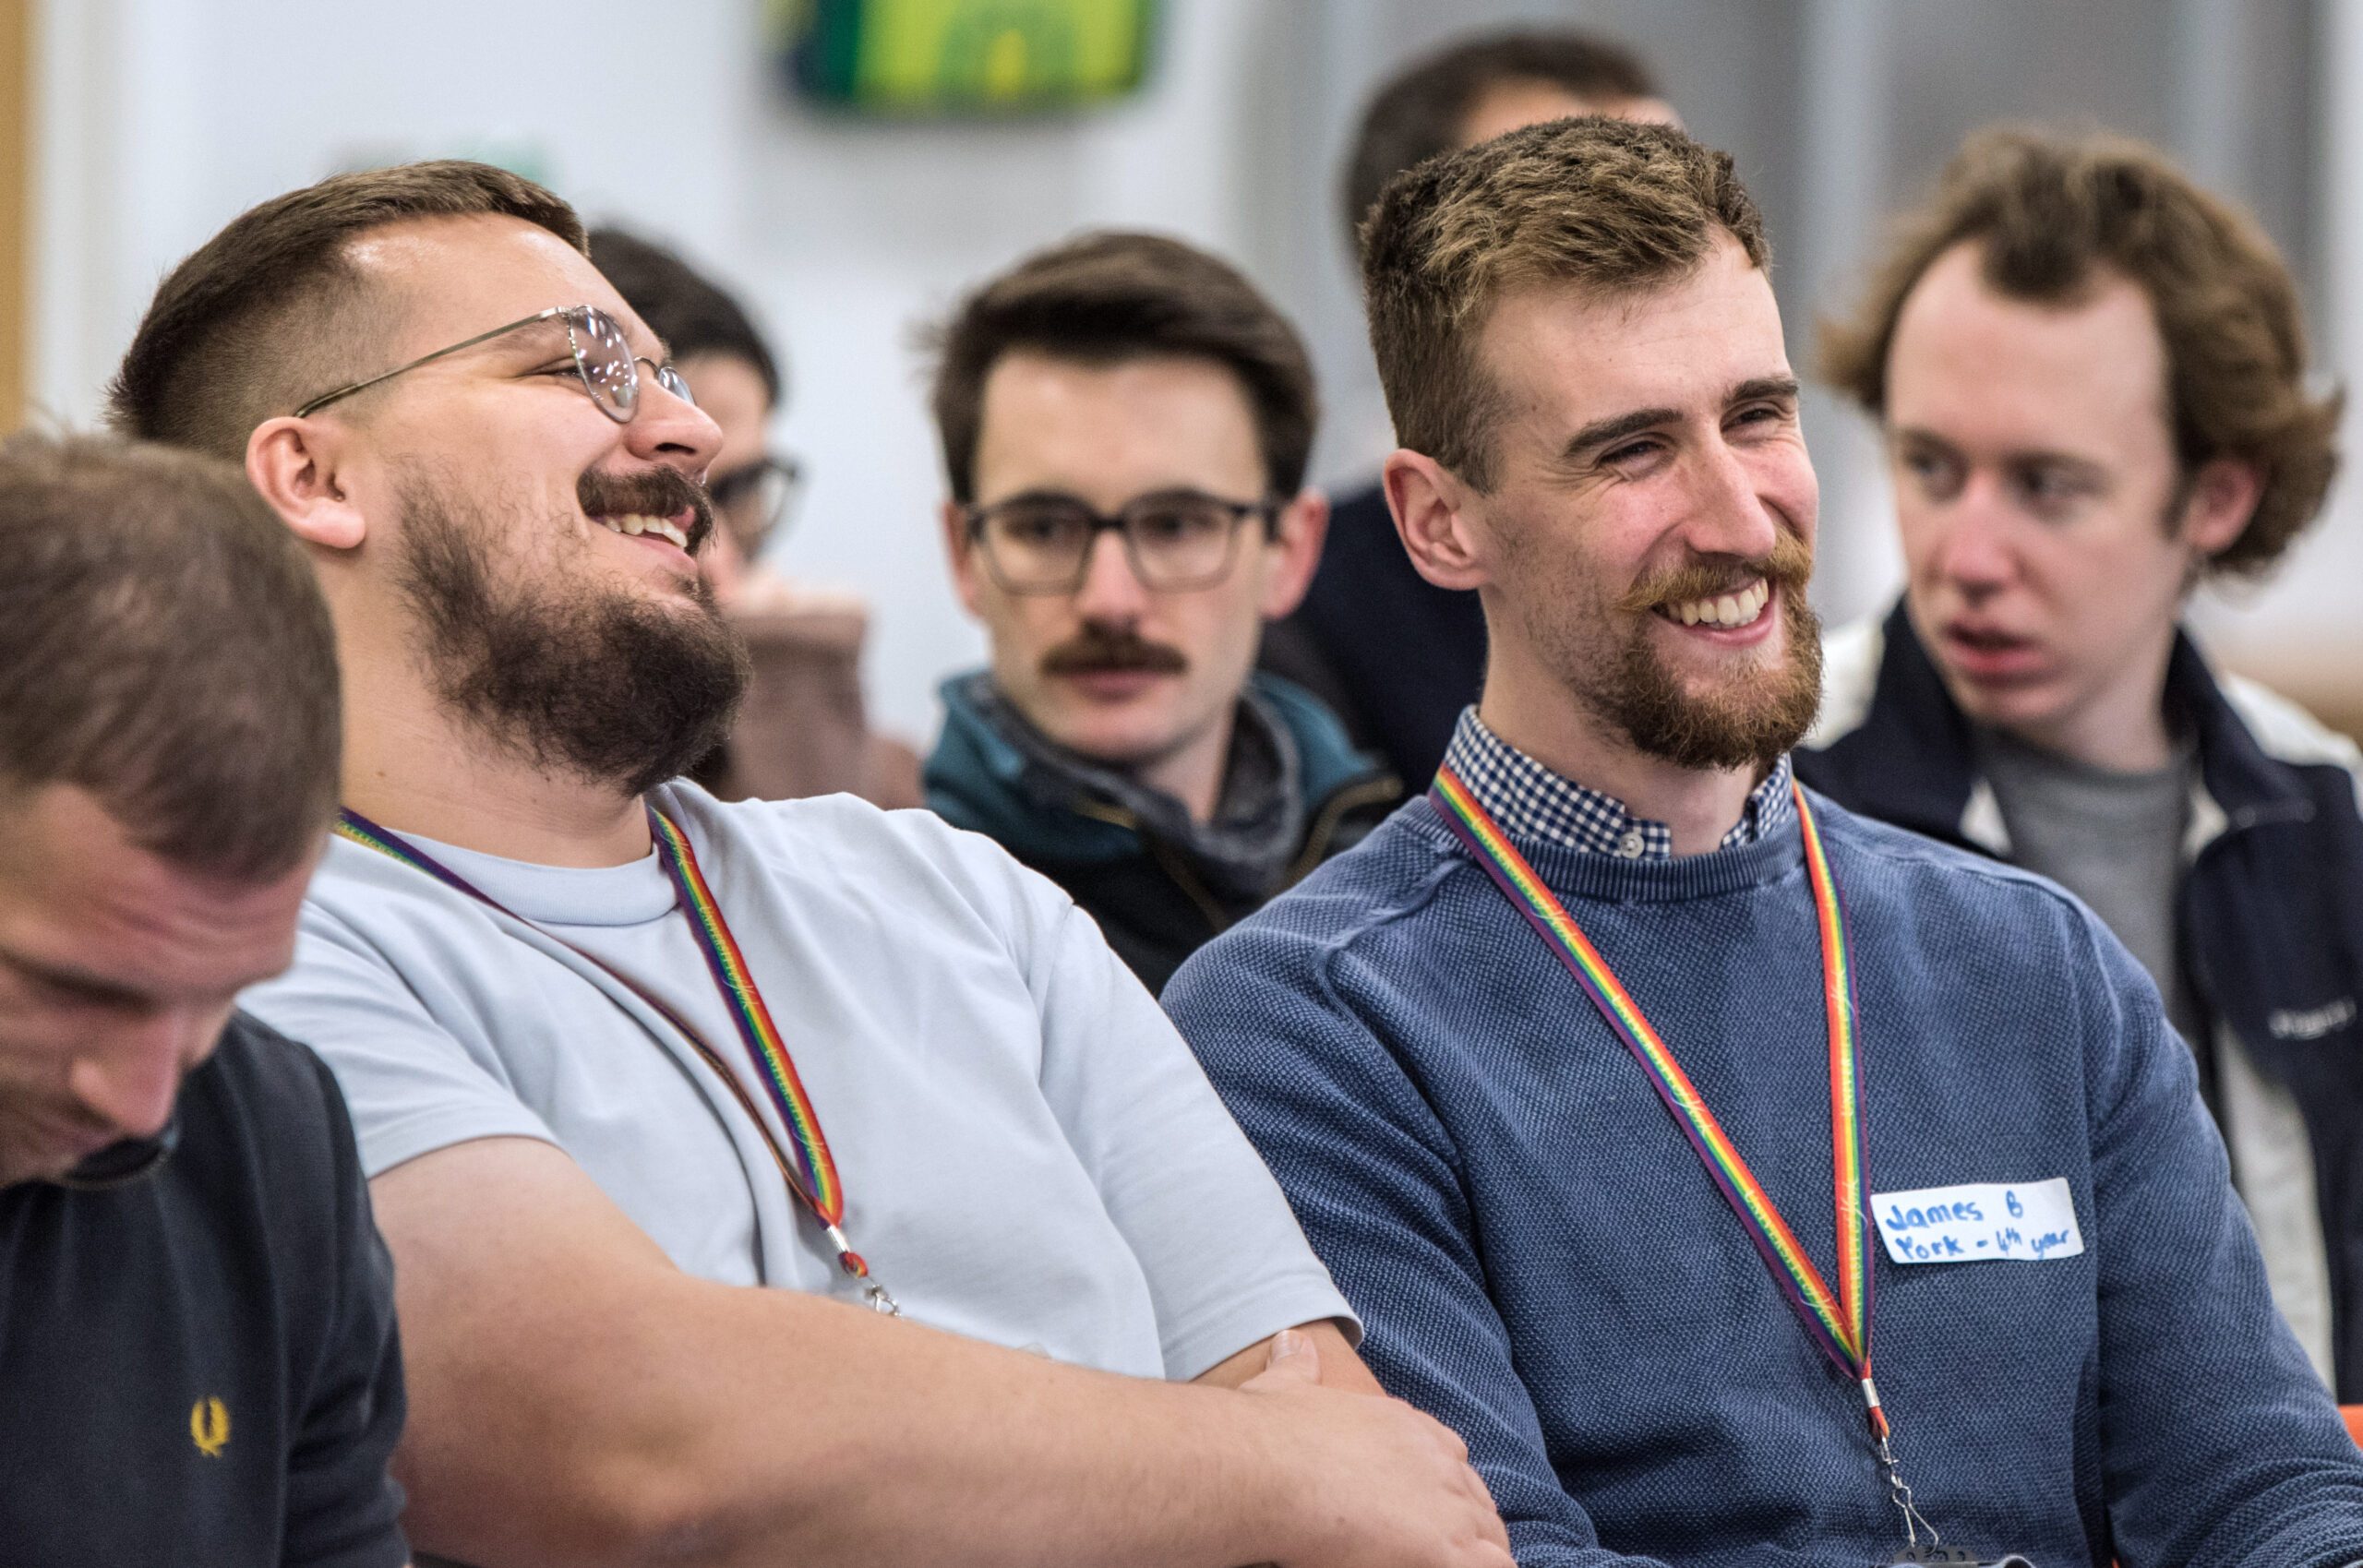 A close up photograph of smiling Post-Graduate Researchers at the Student Symposium held in December 2022